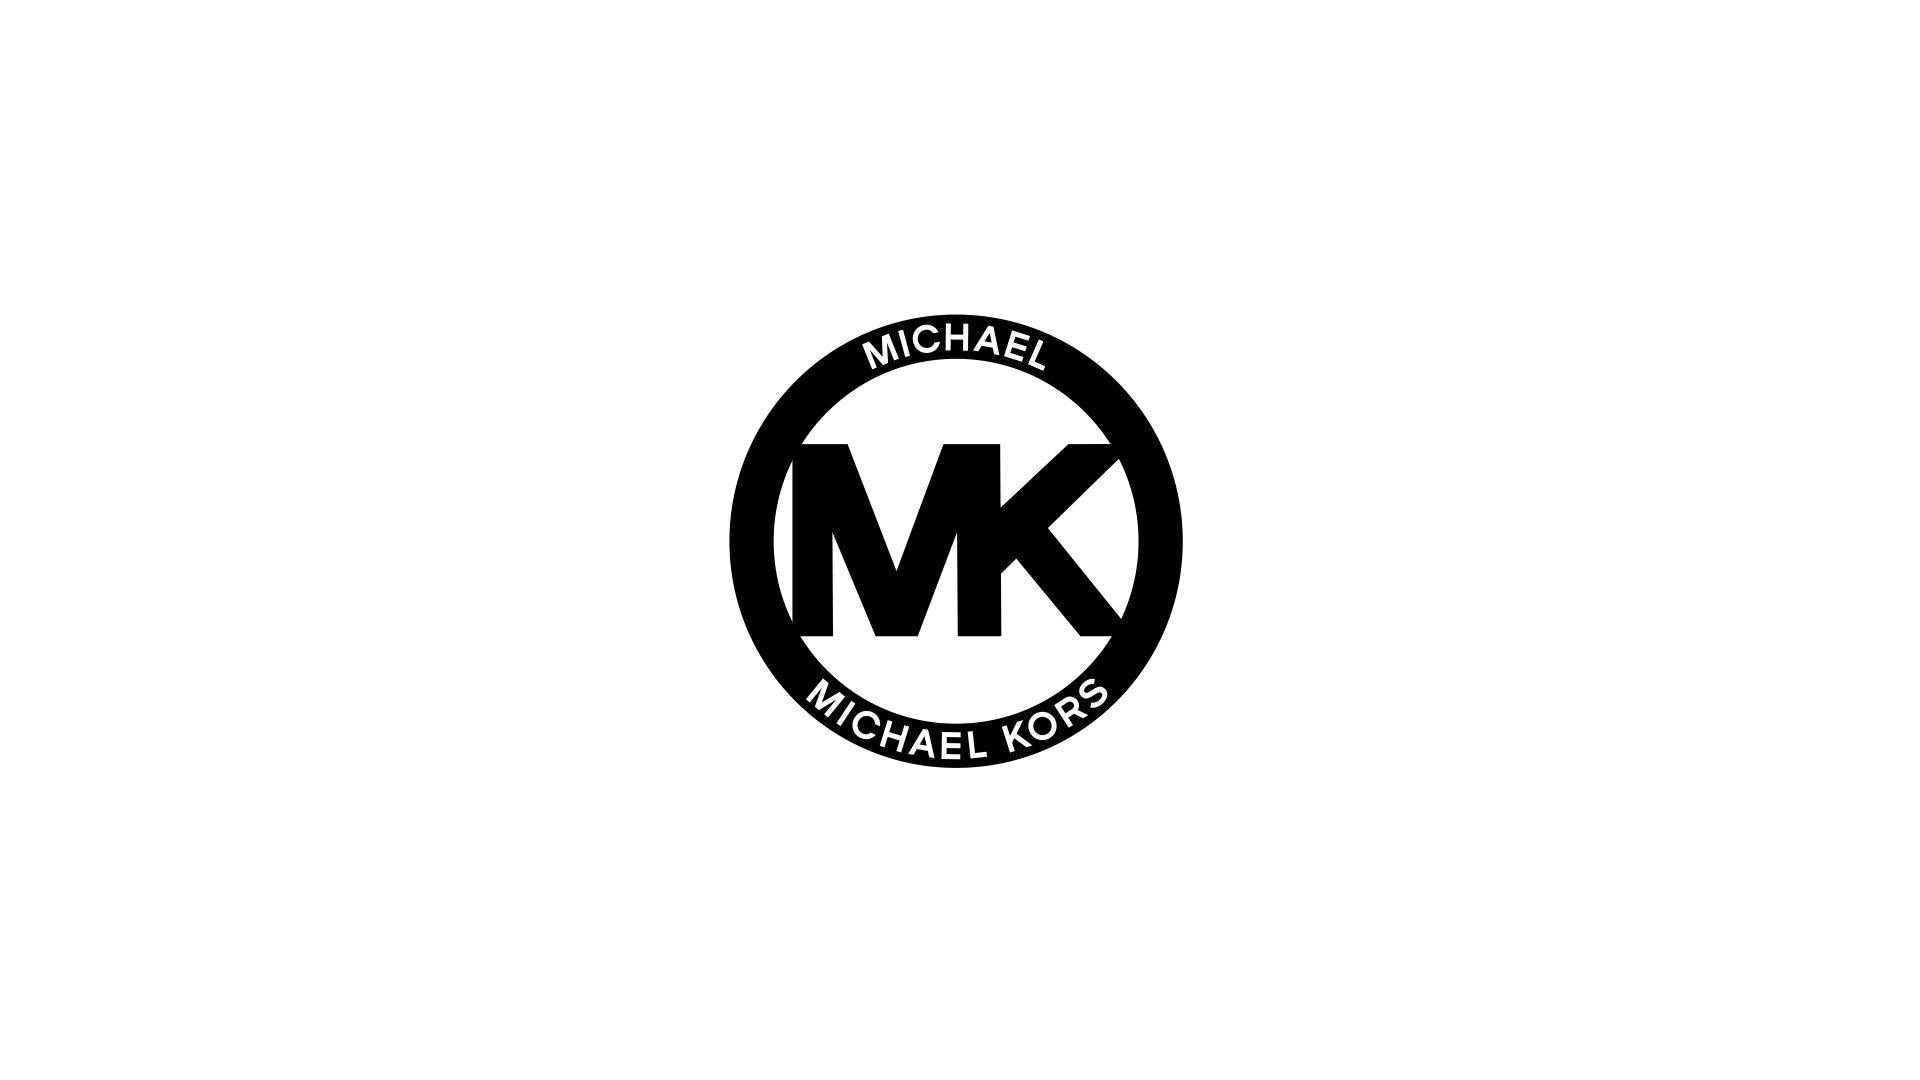 1920X1080 Michael Kors Wallpaper and Background